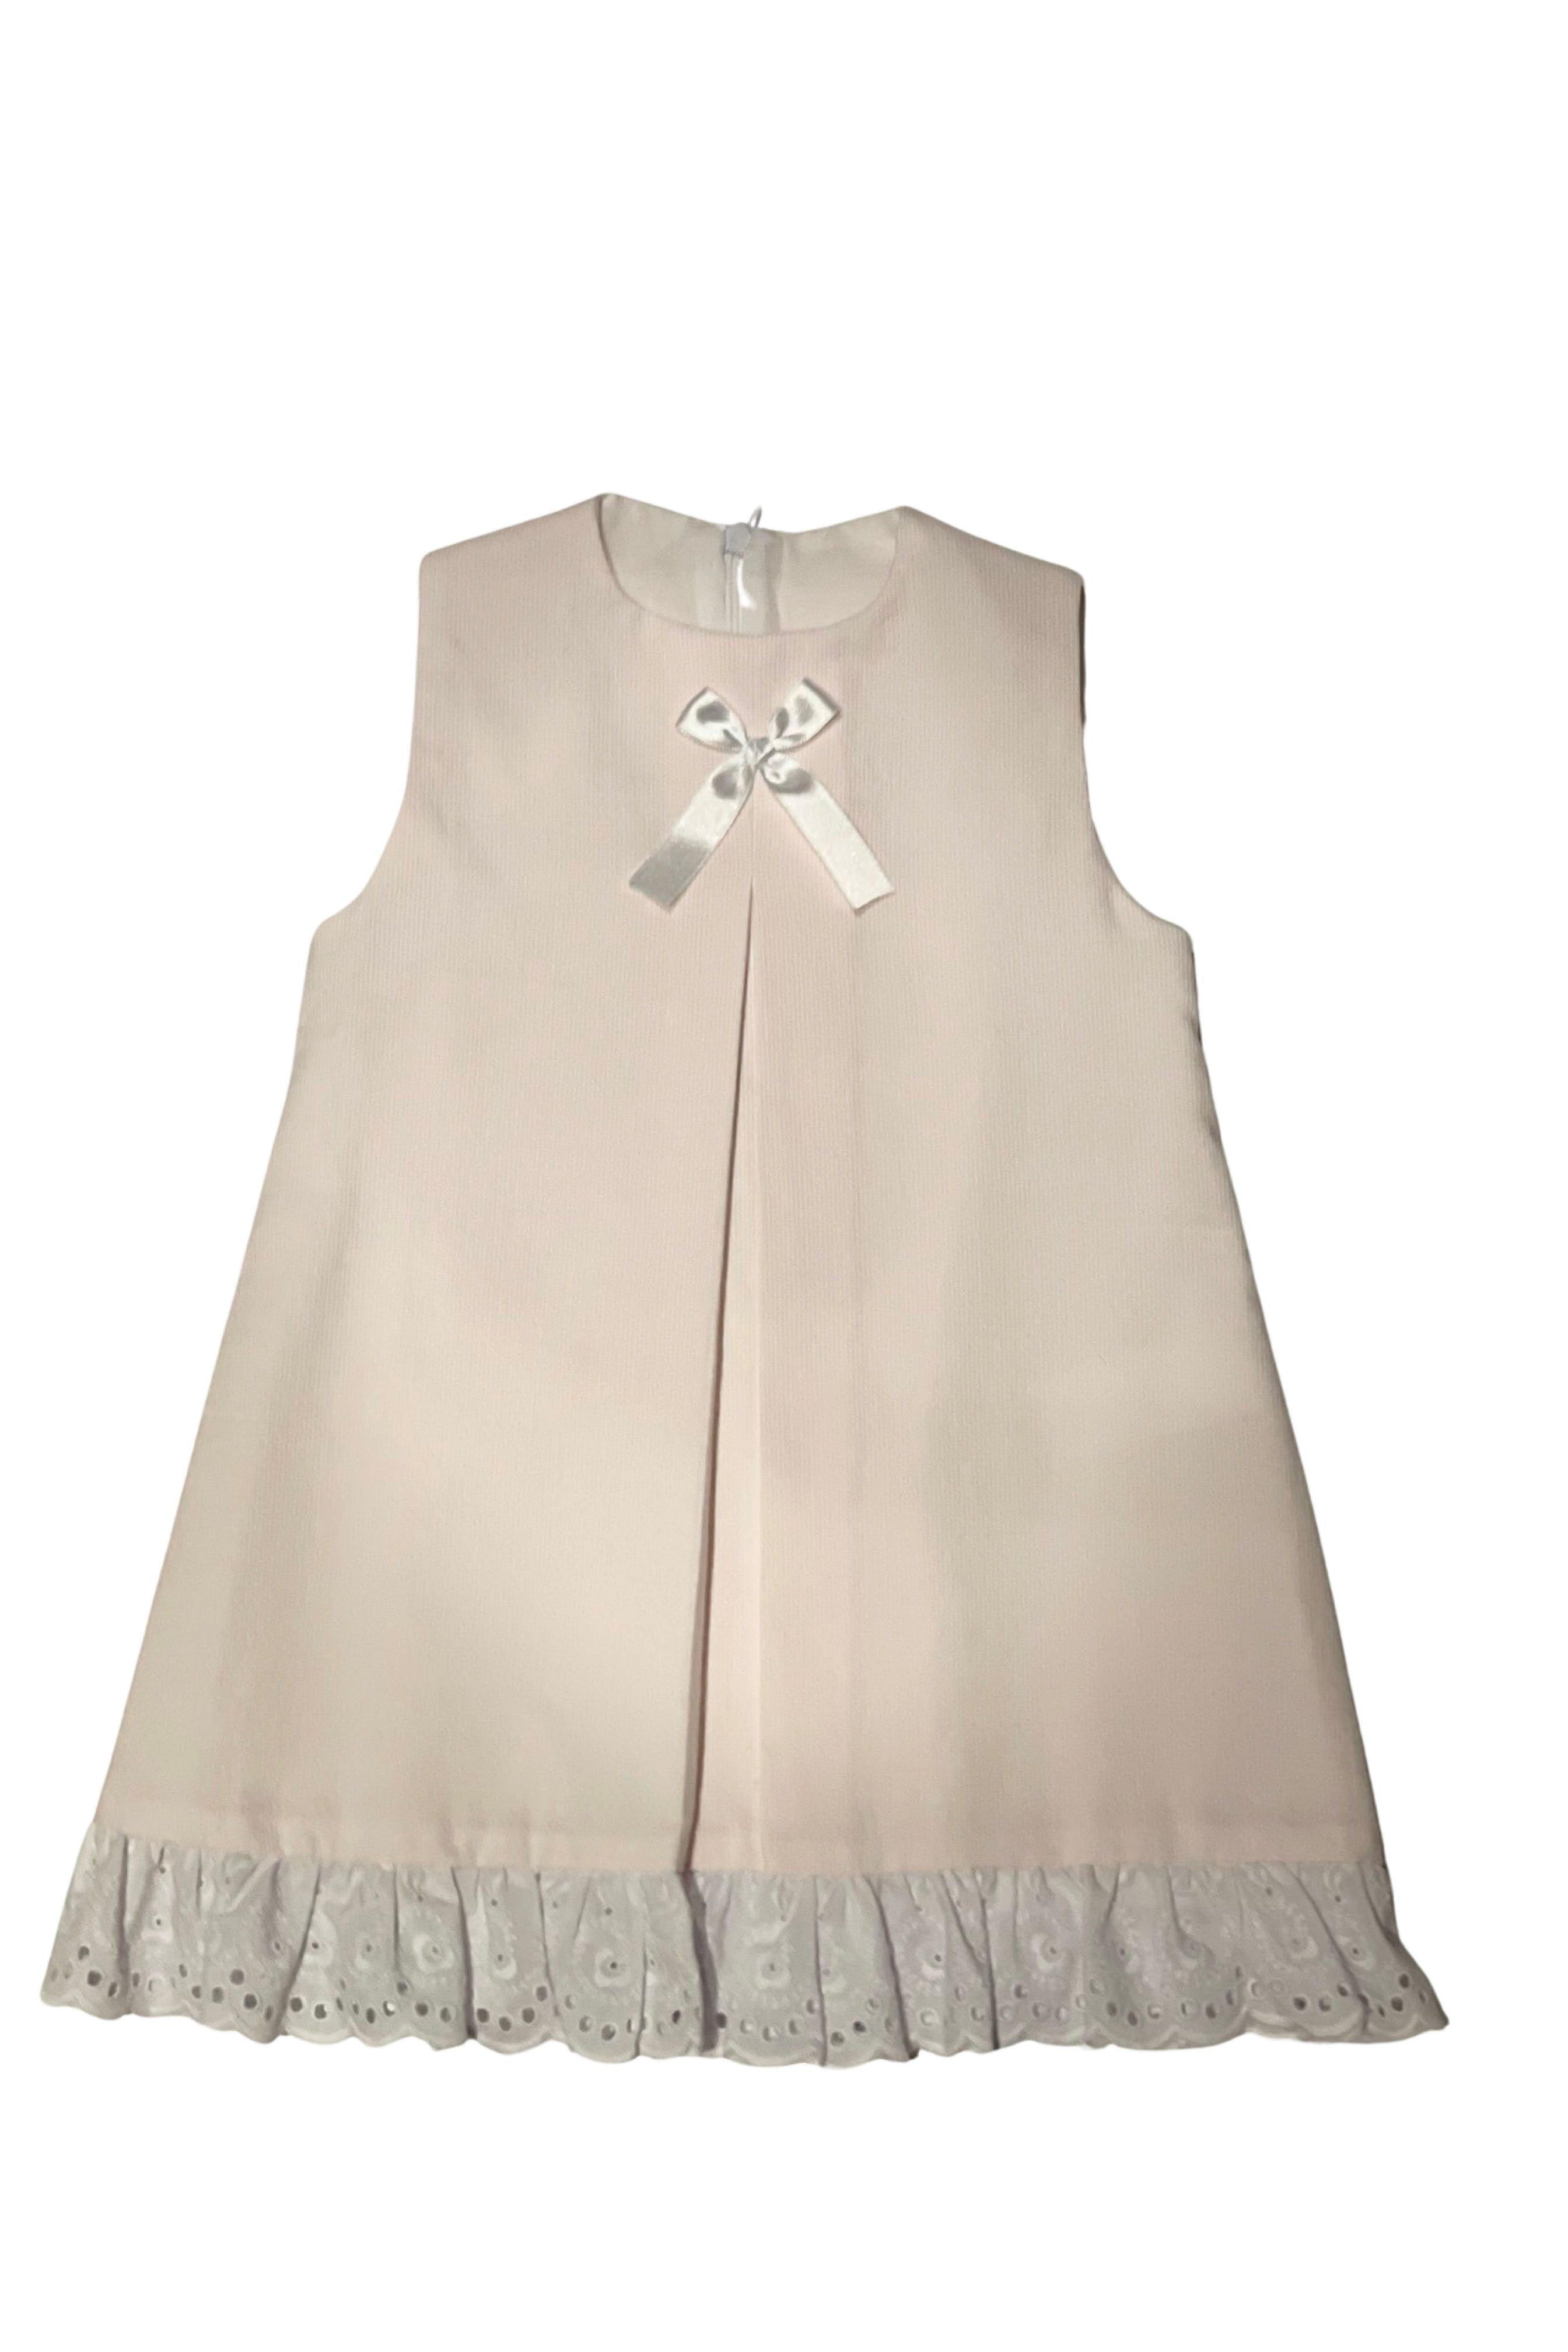 SS24 Lor Miral Girls Pink Bow A Line Dress Dainty Delilah